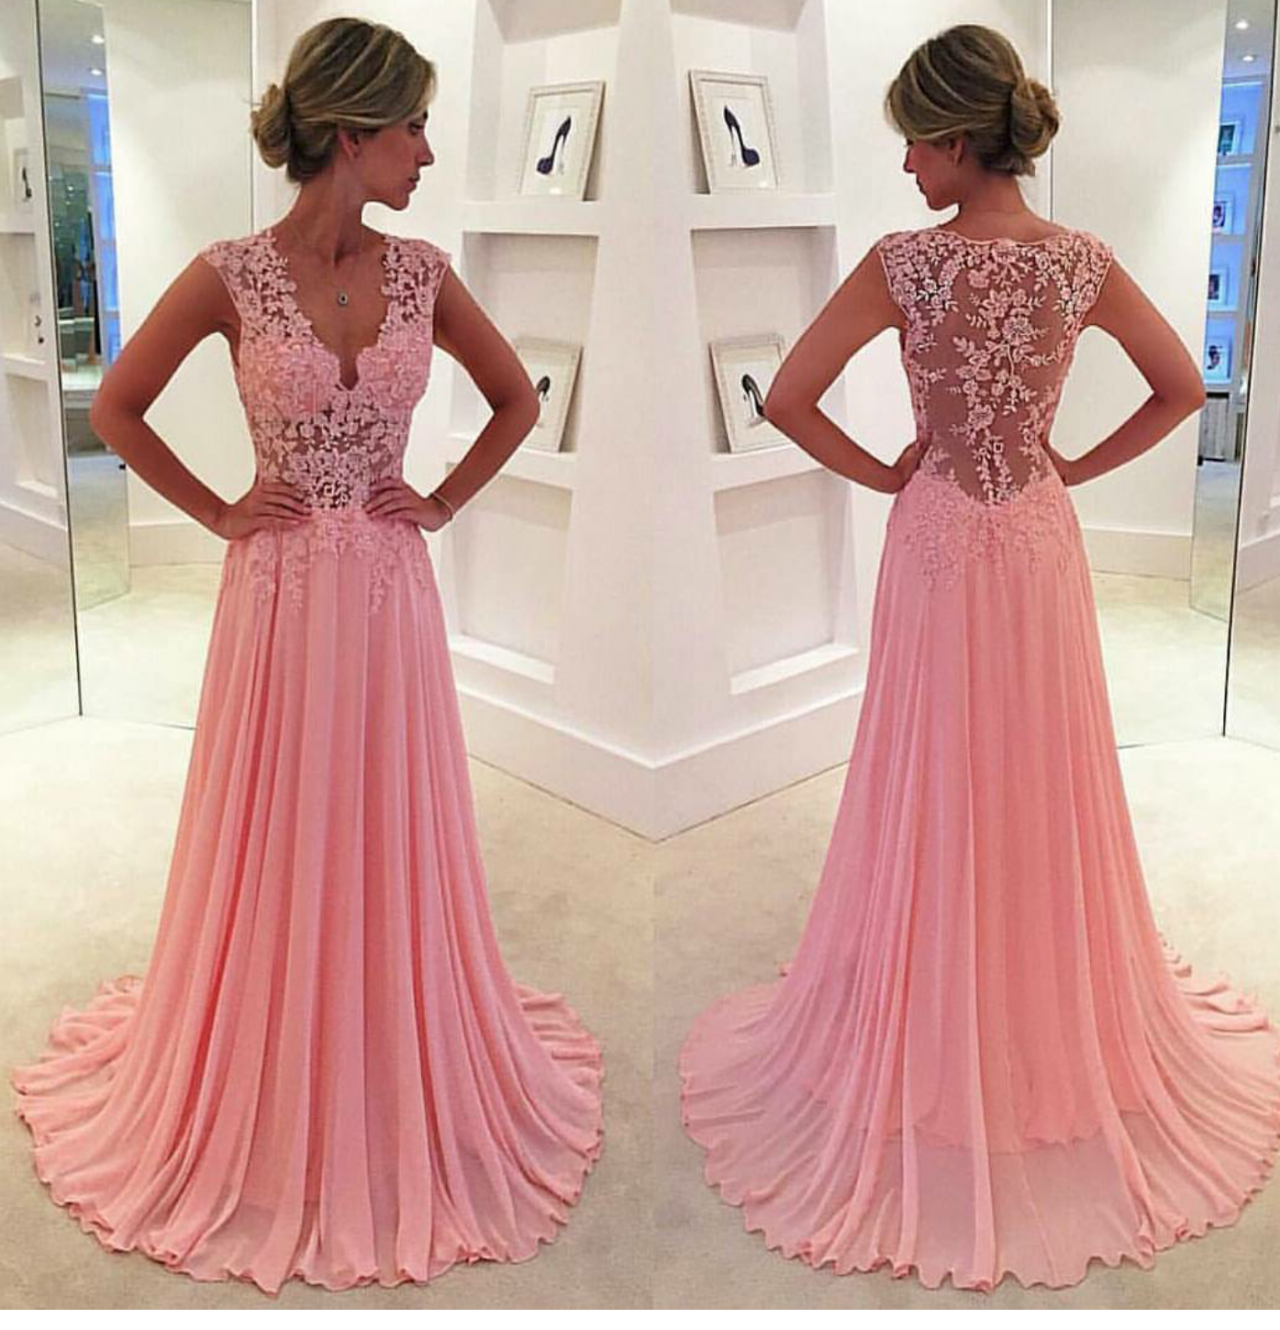 Pink Chiffon Prom Dresses Sheer Lace Applique Top V Neck Long Elegant Evening Gowns